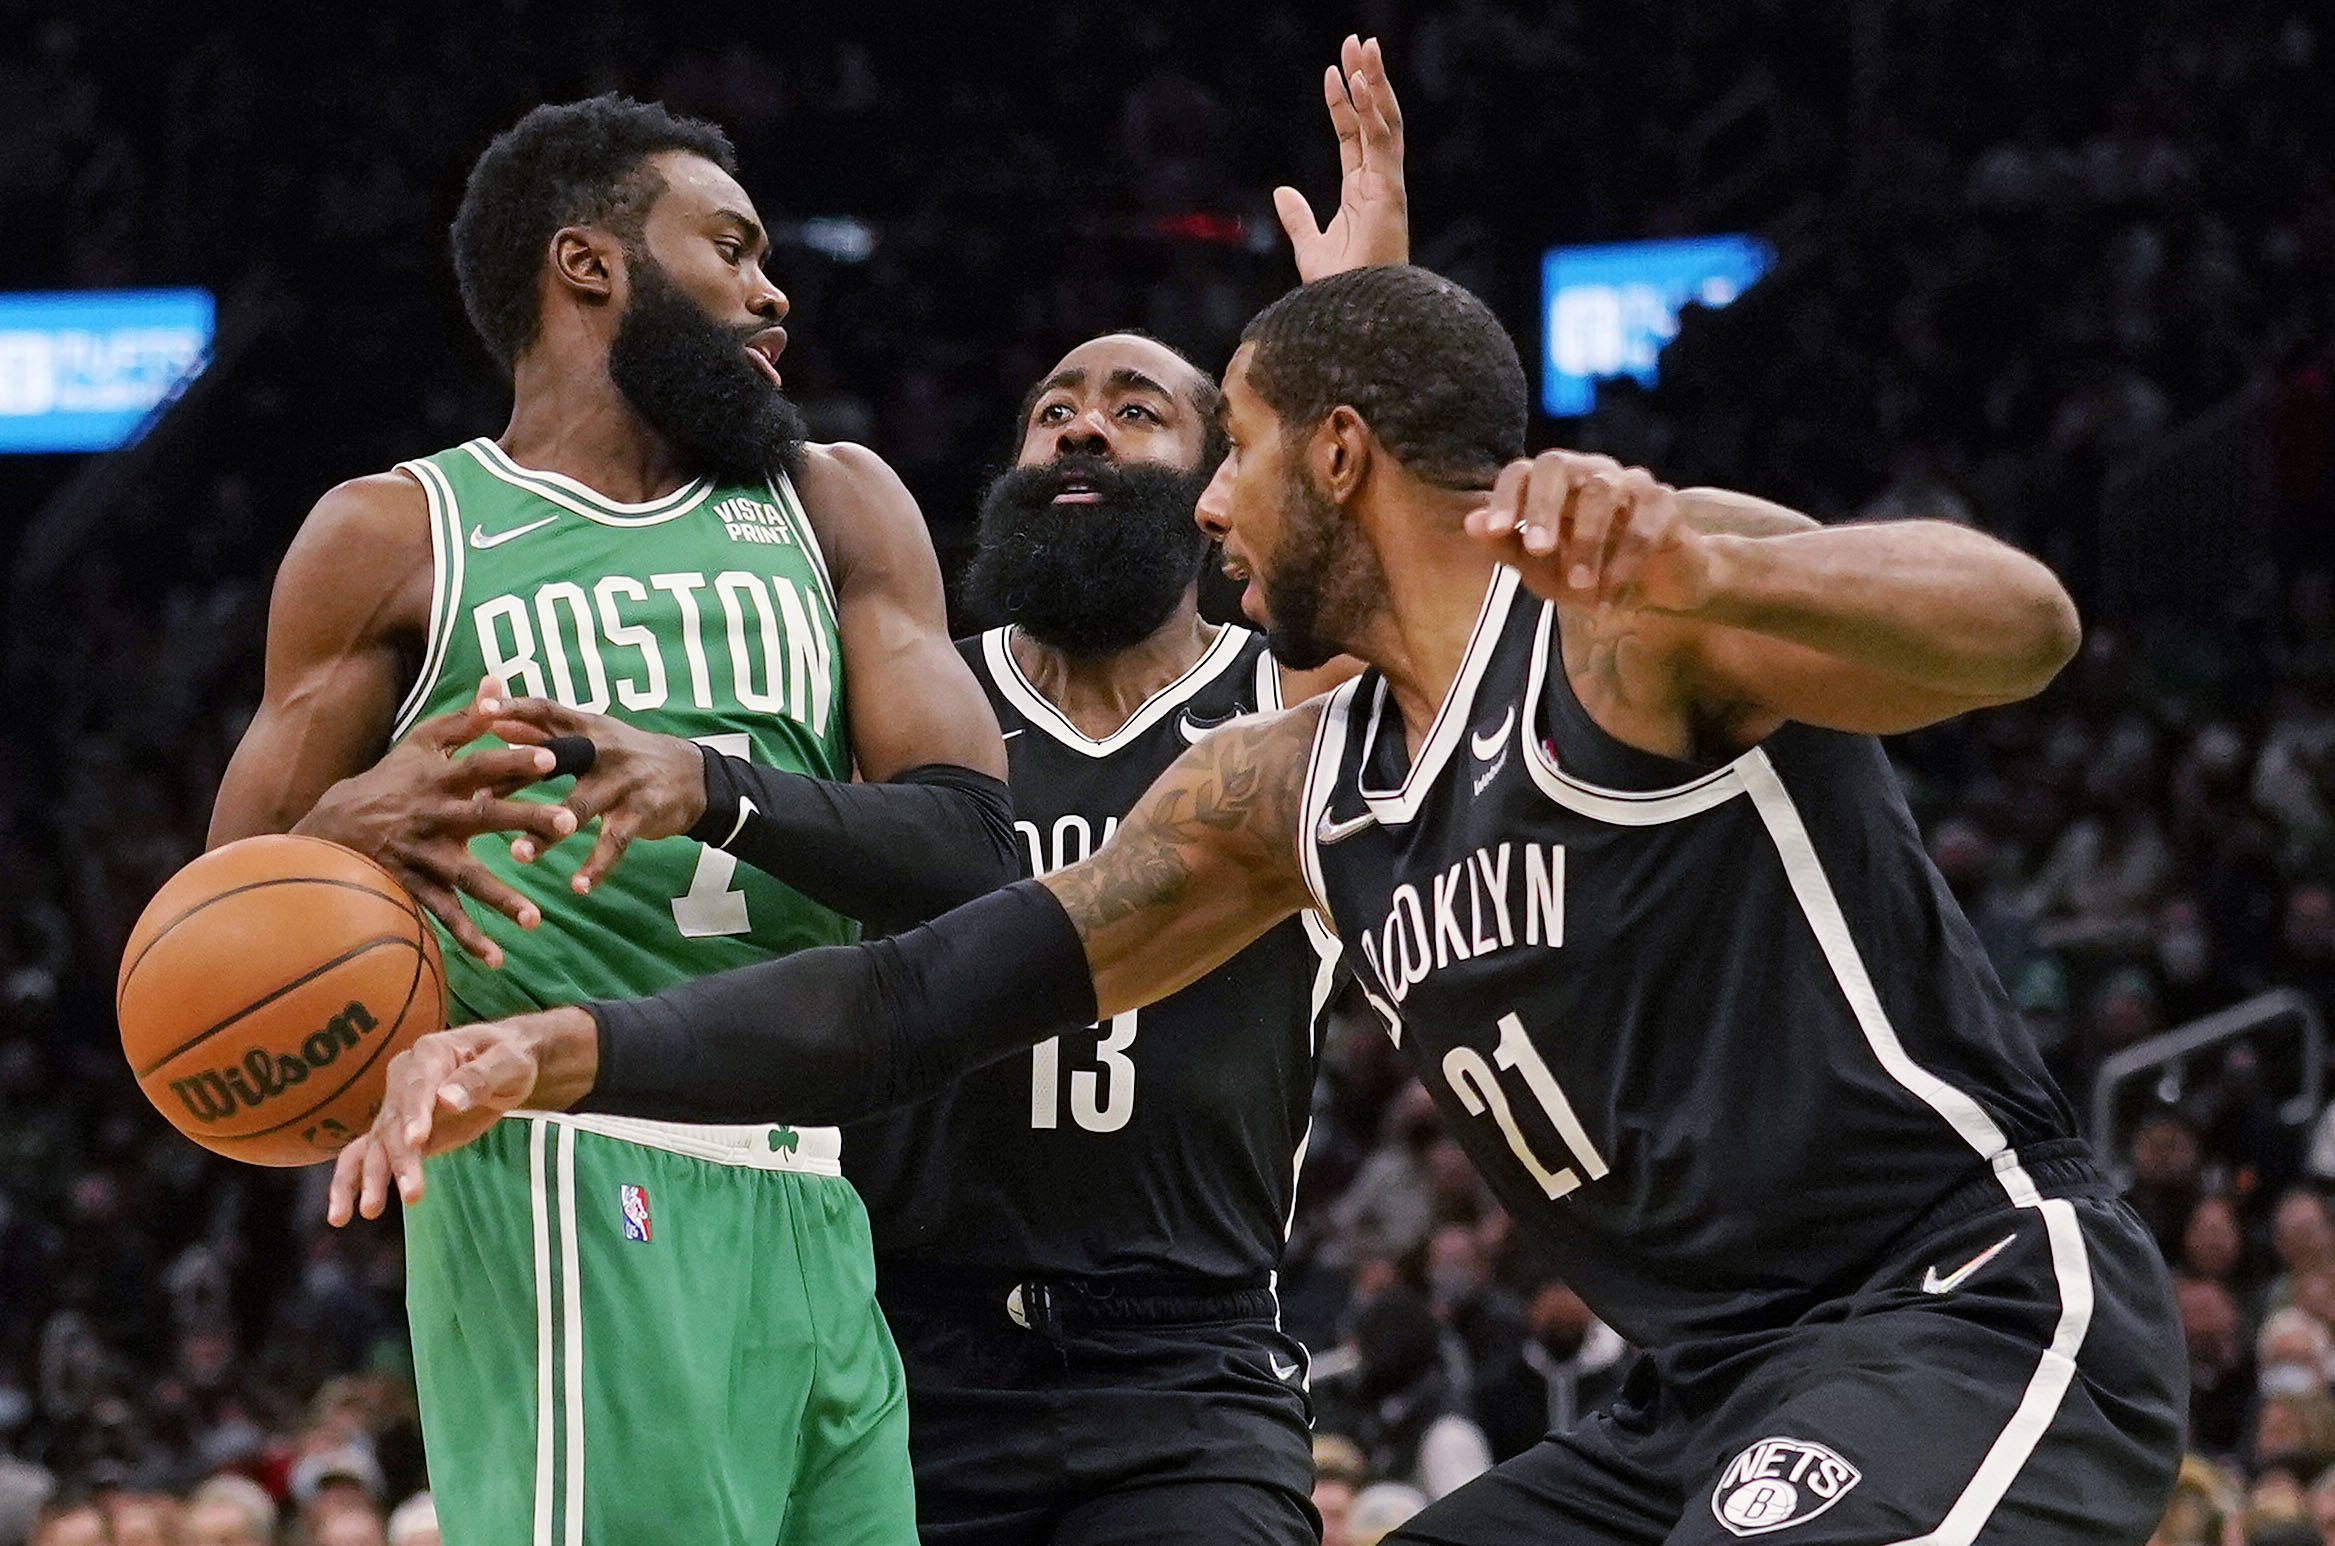 LaMarcus Aldridge knocks the ball away from the Celtics' Jaylen Brown during Wednesday night's game.